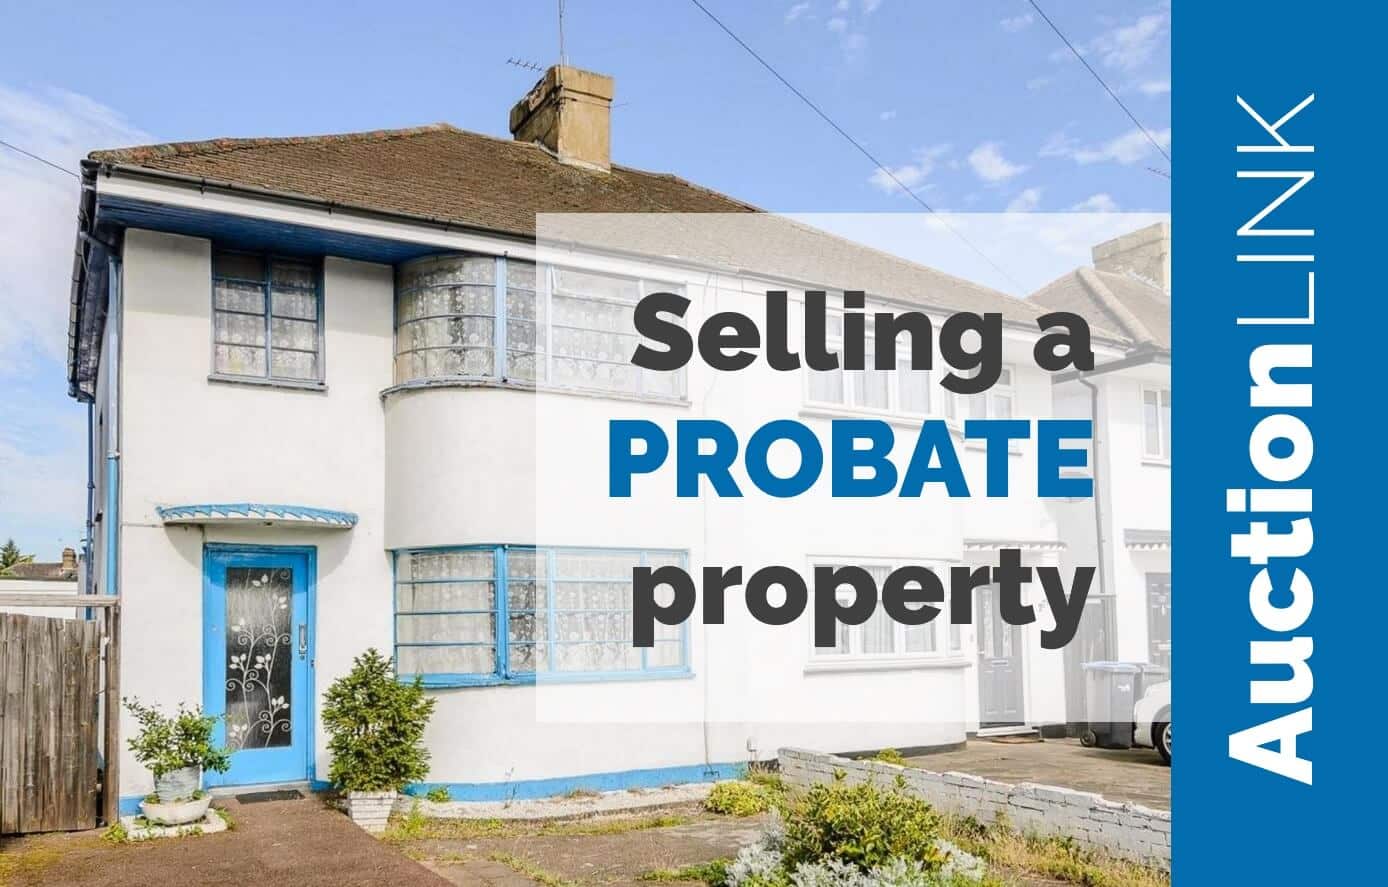 Selling a probate property